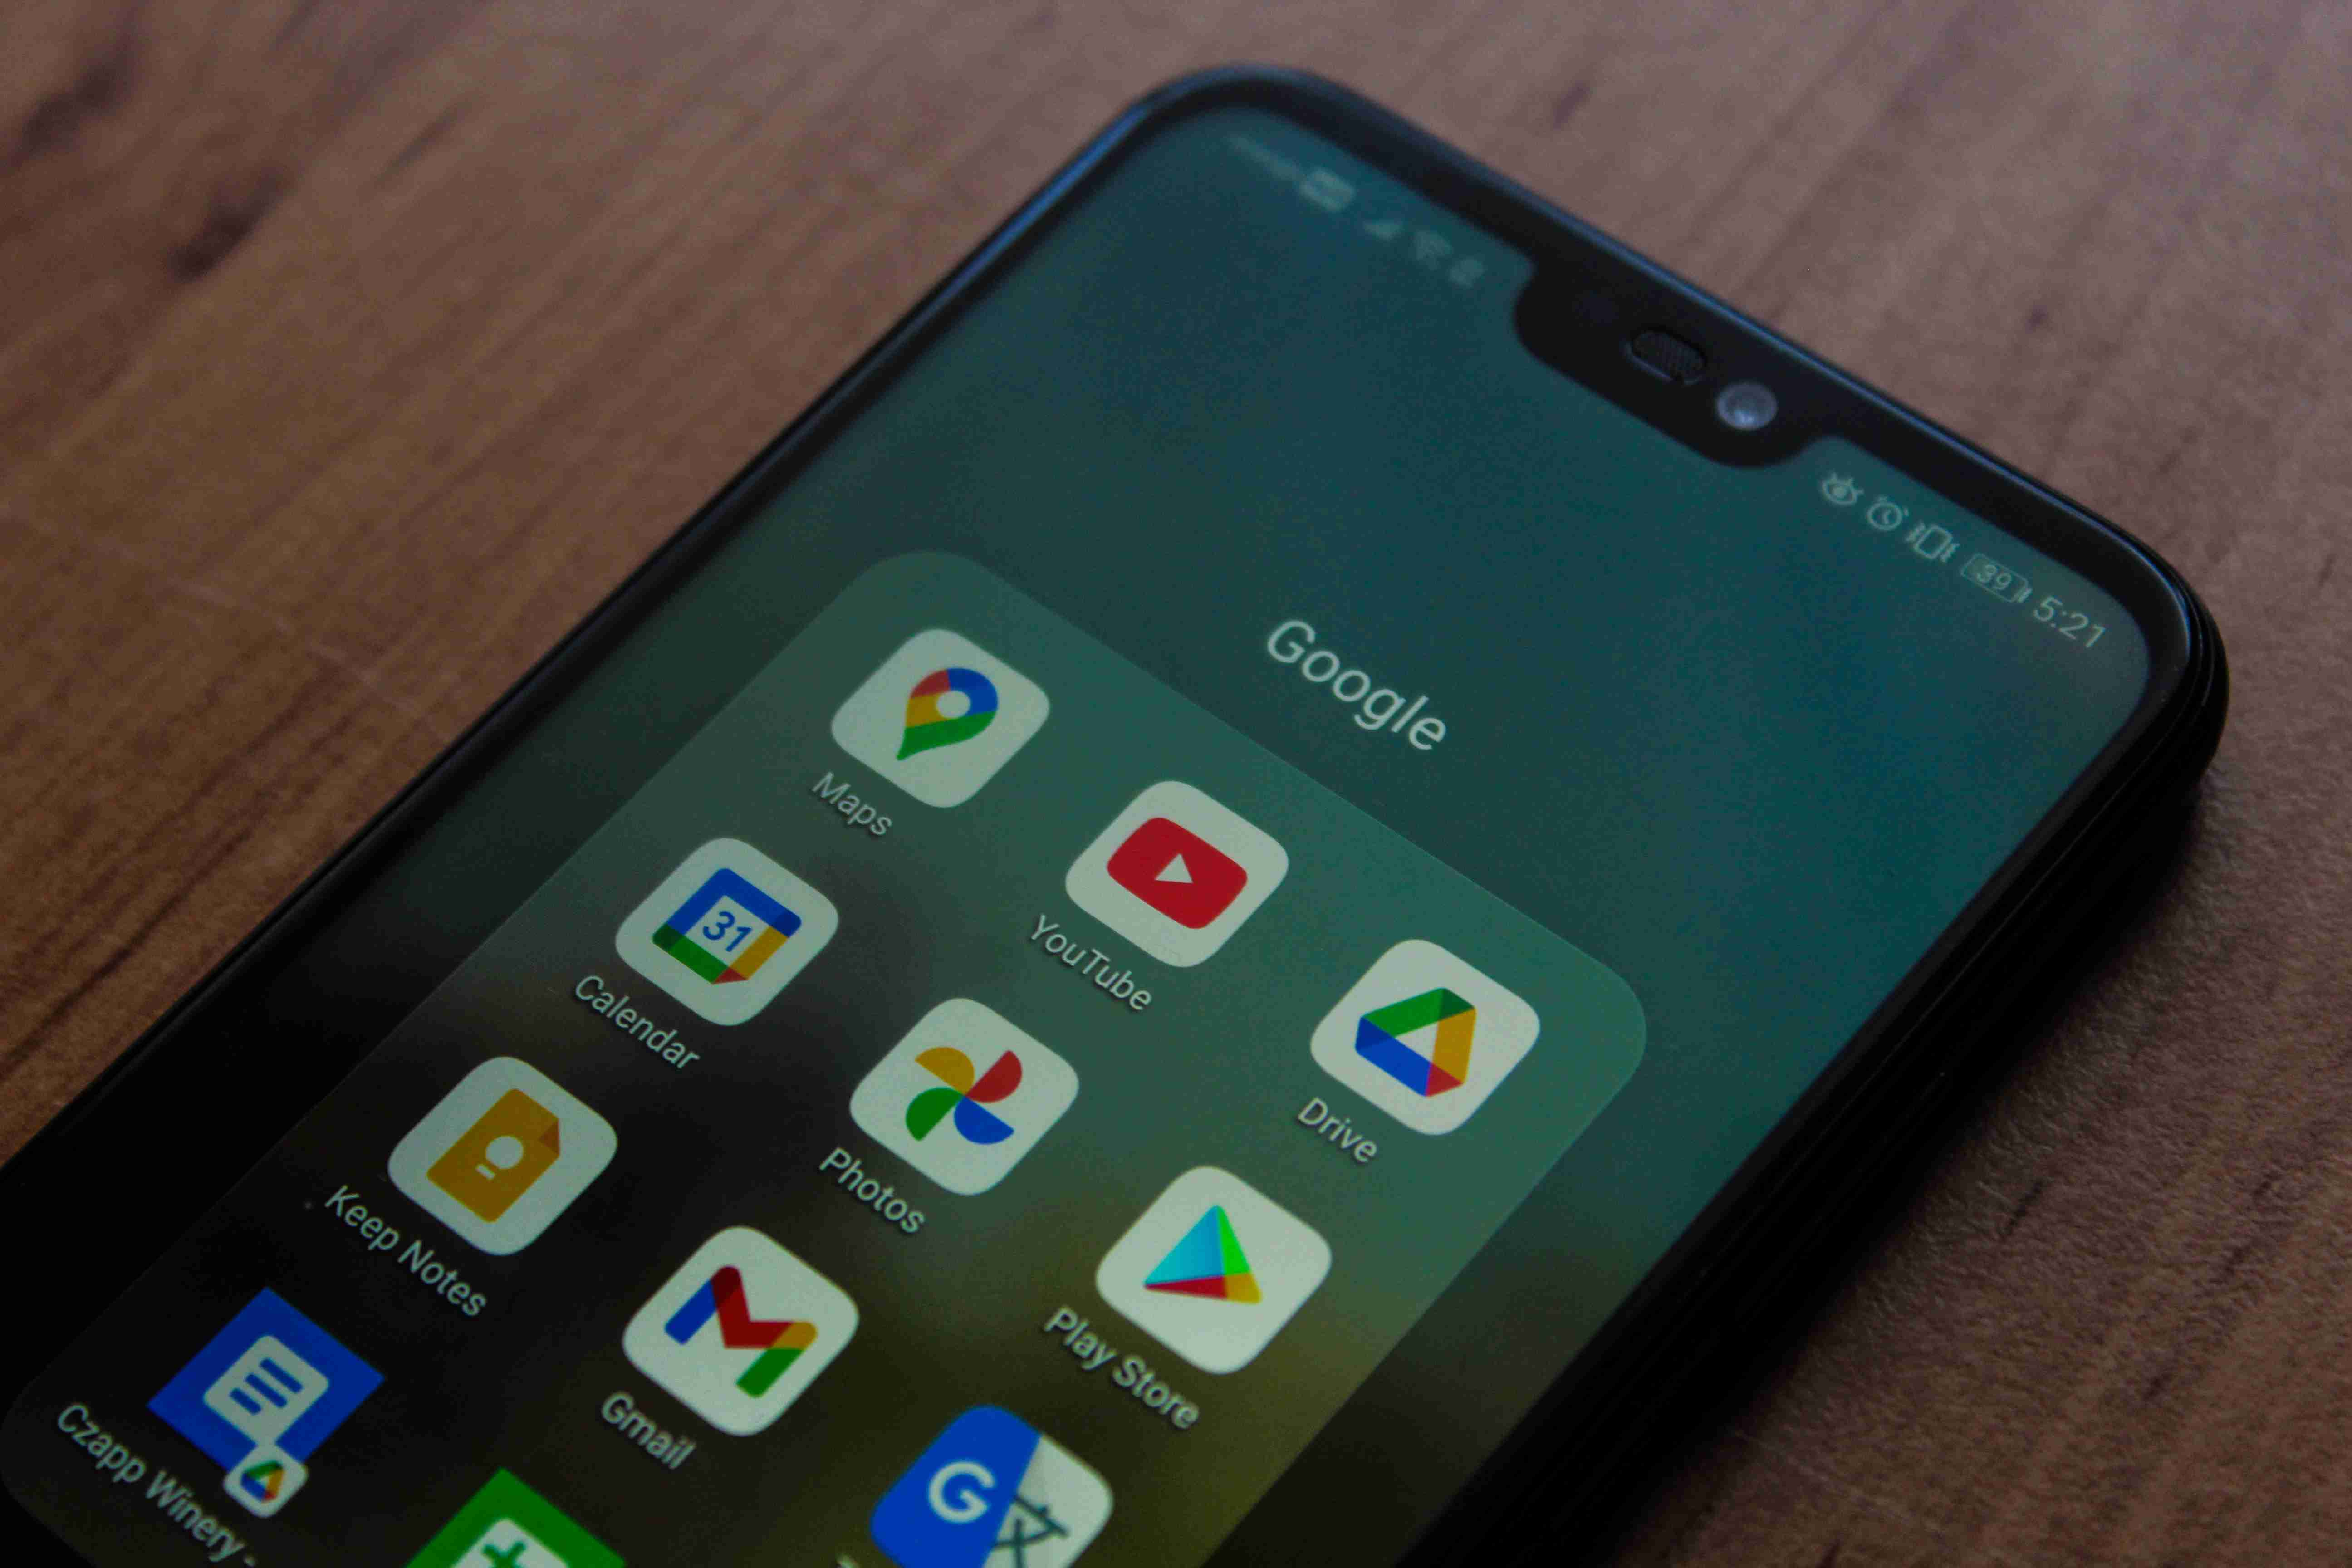 Troubleshooting Guide: How to Fix the Google Play Store Has Stopped Error on Your Android Phone